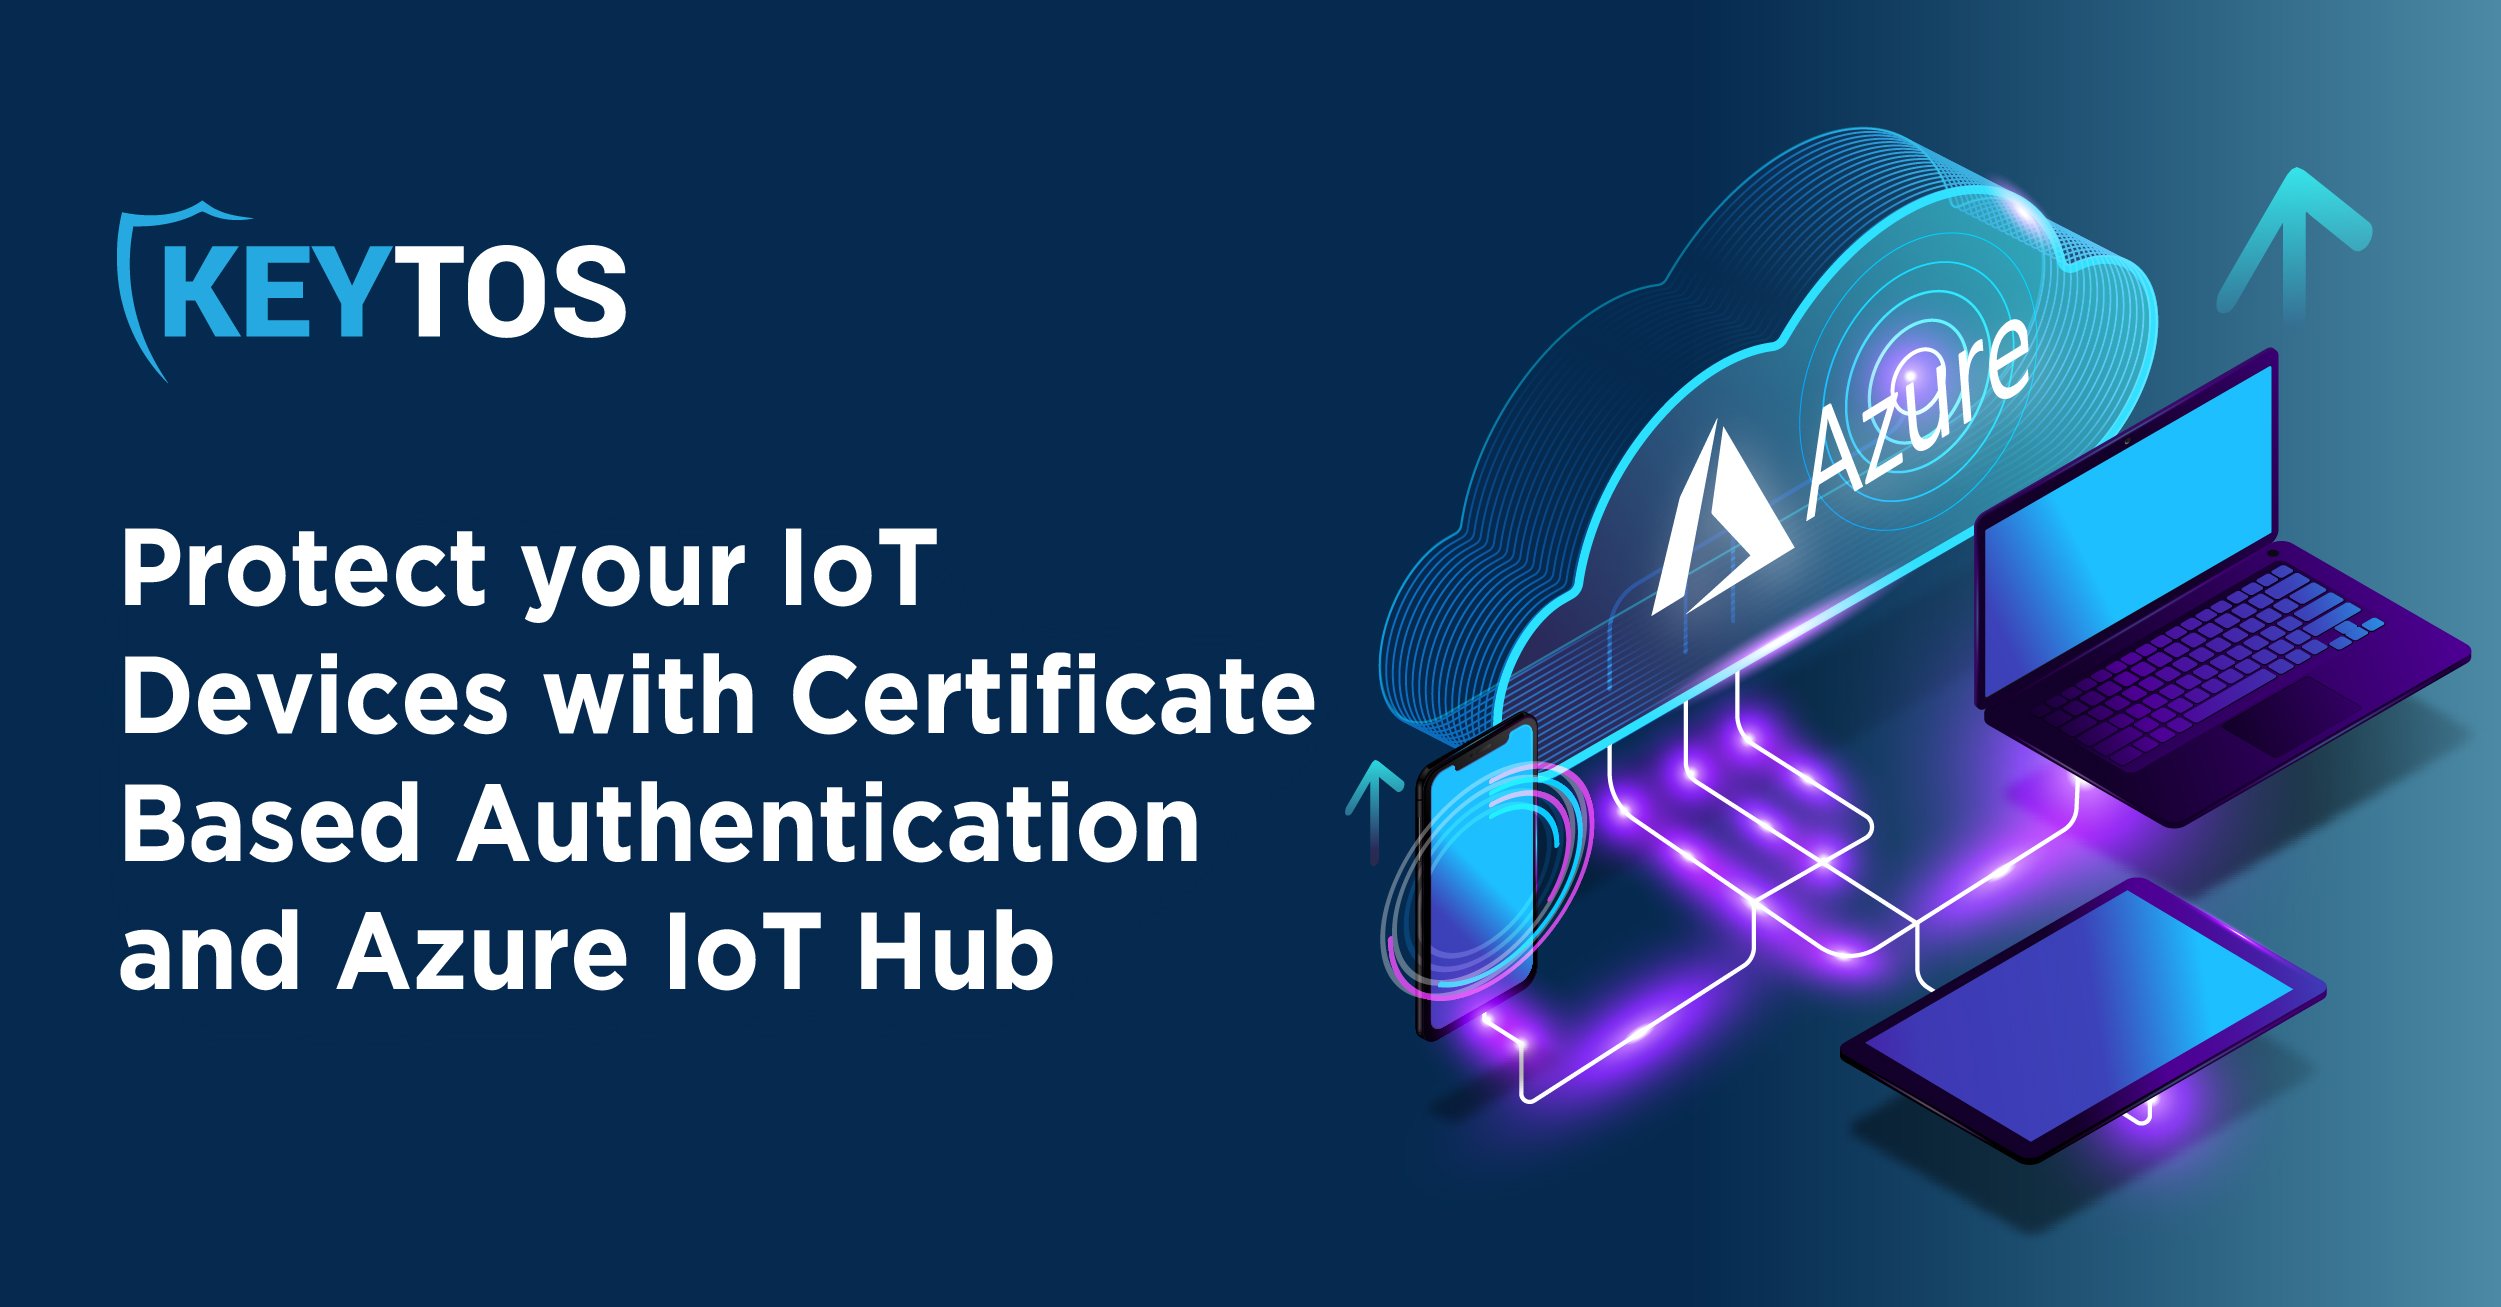 Why You Need a Cloud Based Certificate Authority for Azure IoT Hub